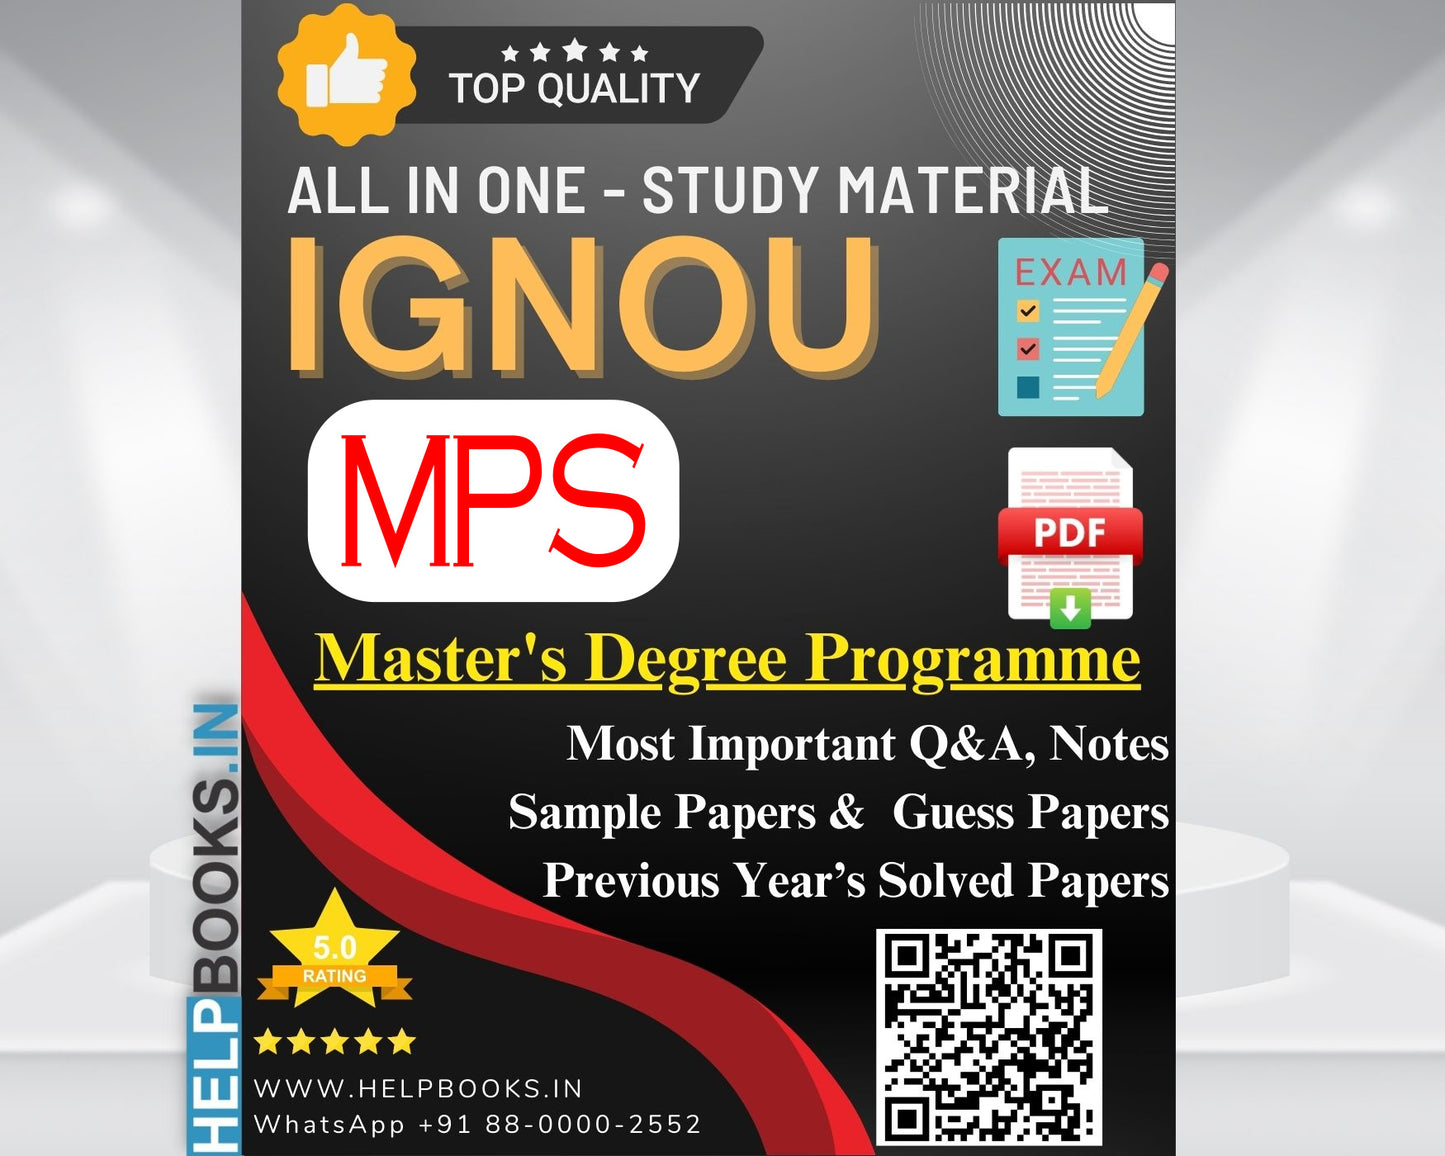 MPS IGNOU Exam Combo of 10 Solved Papers: 5 Previous Years' Solved Papers & 5 Sample Guess Papers for Master of Arts Political Science